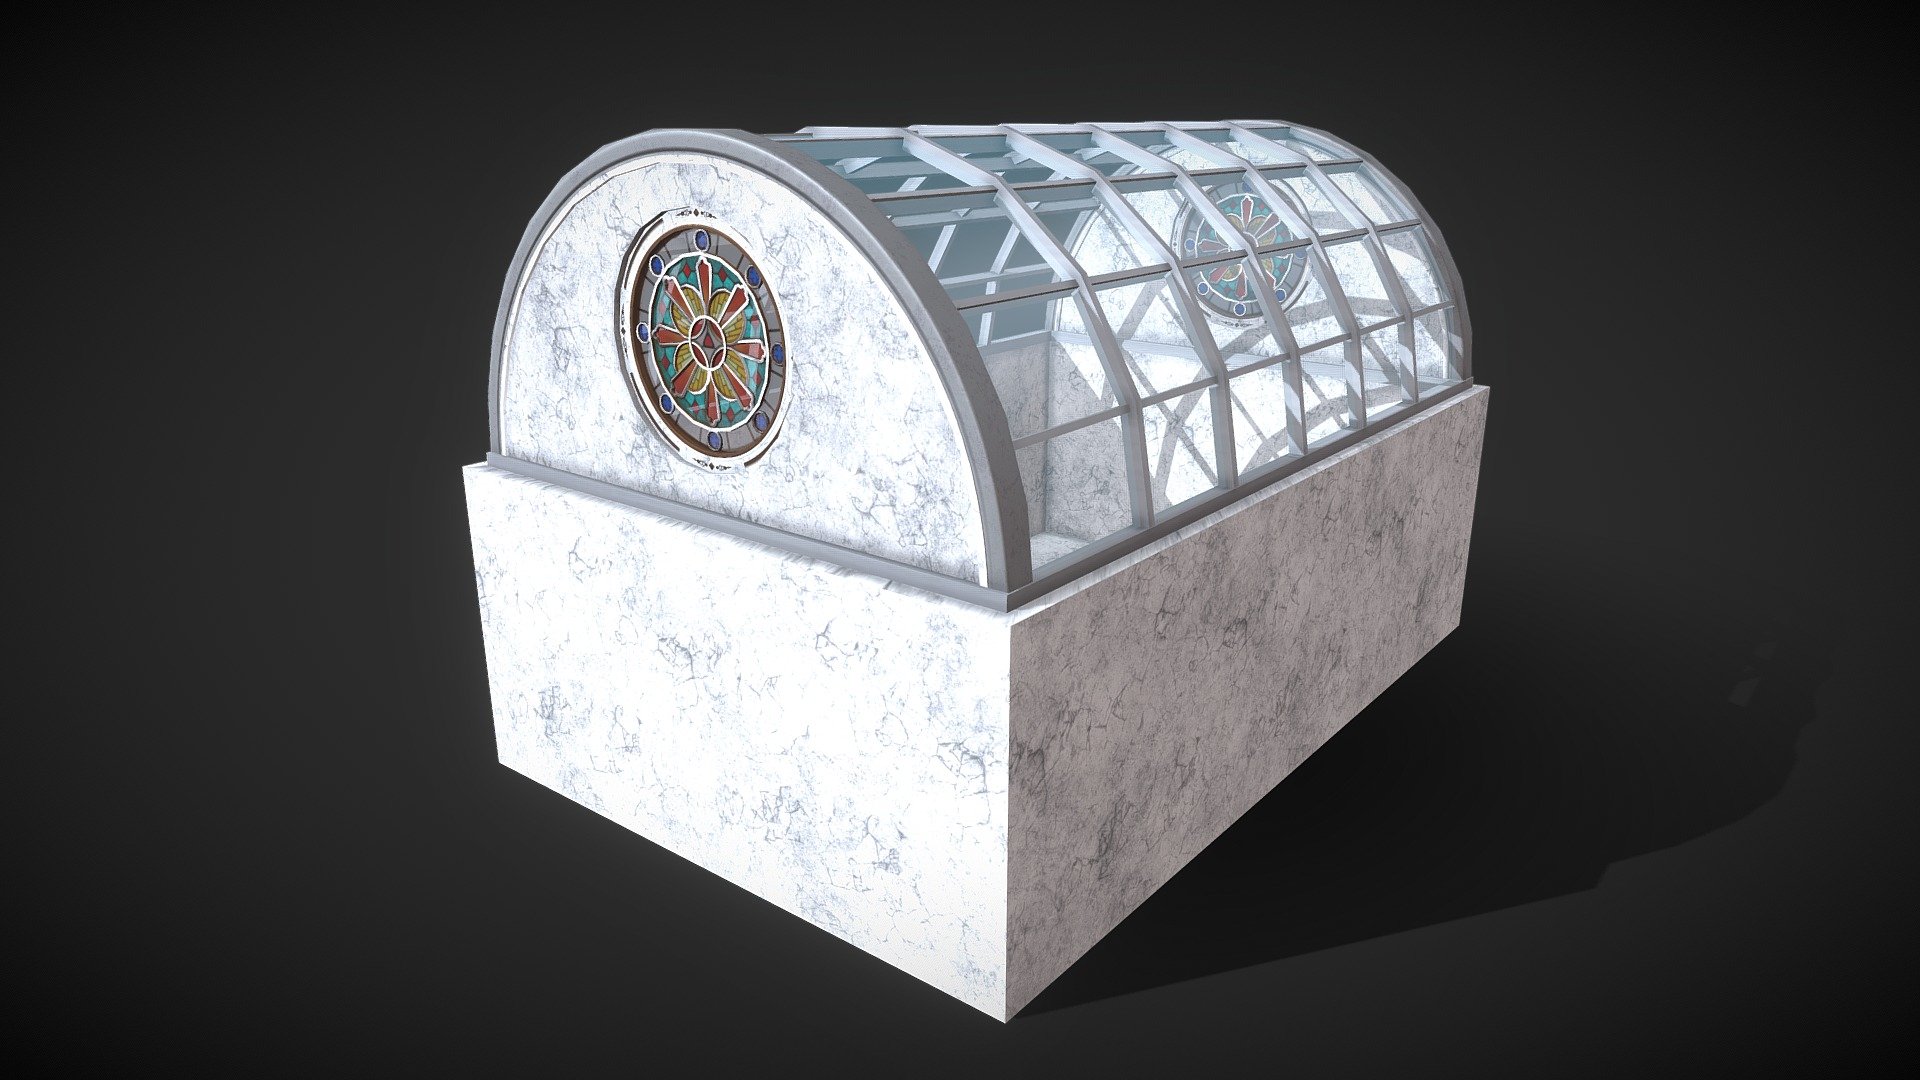 Rectangular building with circular stained glass window.

A rectangular building with marble walls, decorated with two circular stained glass windows, and curved glass roof supported with metal frames. You can place anything you want in the building.

custom double sided transparent shader for glass.
Roof Metal frame meshes are separated, so distance can be adjusted freely.



STAINED GLASS + BUILDING

Total Polycount: 4400 Triangles

Roof Frame

Albedo PNG Texture: 512 x 512

Roof Wall

PNG Texture: 2048 x 2048

(Albedo and Specular)

Wall

PNG Texture: 2048 x 2048

(Albedo and Specular)

SGWindow and SGWindow Frame share same set of textures,
except SGWindow Frame uses unity's standard specular shader, and SGWindow uses custom double sided transparent shader.

PNG Texture: 2048 x 2048

(Albedo, AO, Normal, and Specular) - Stained Glass Window - Buy Royalty Free 3D model by Experience Lab Art (@Experience_Lab_Art) 3d model